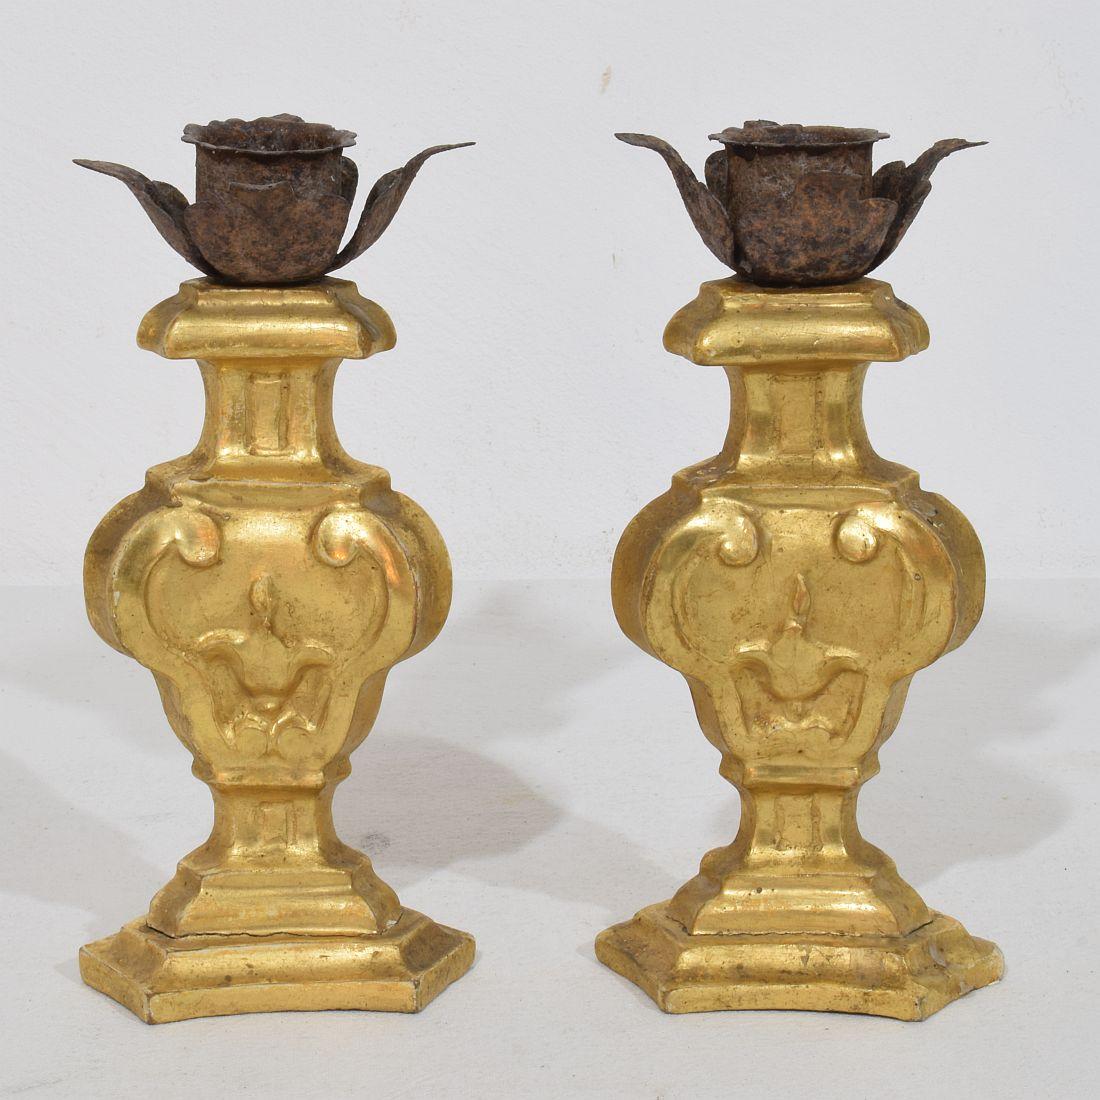 Hand-Carved Couple of Small Late 18th Century Italian Neoclassical Giltwood Candleholders For Sale